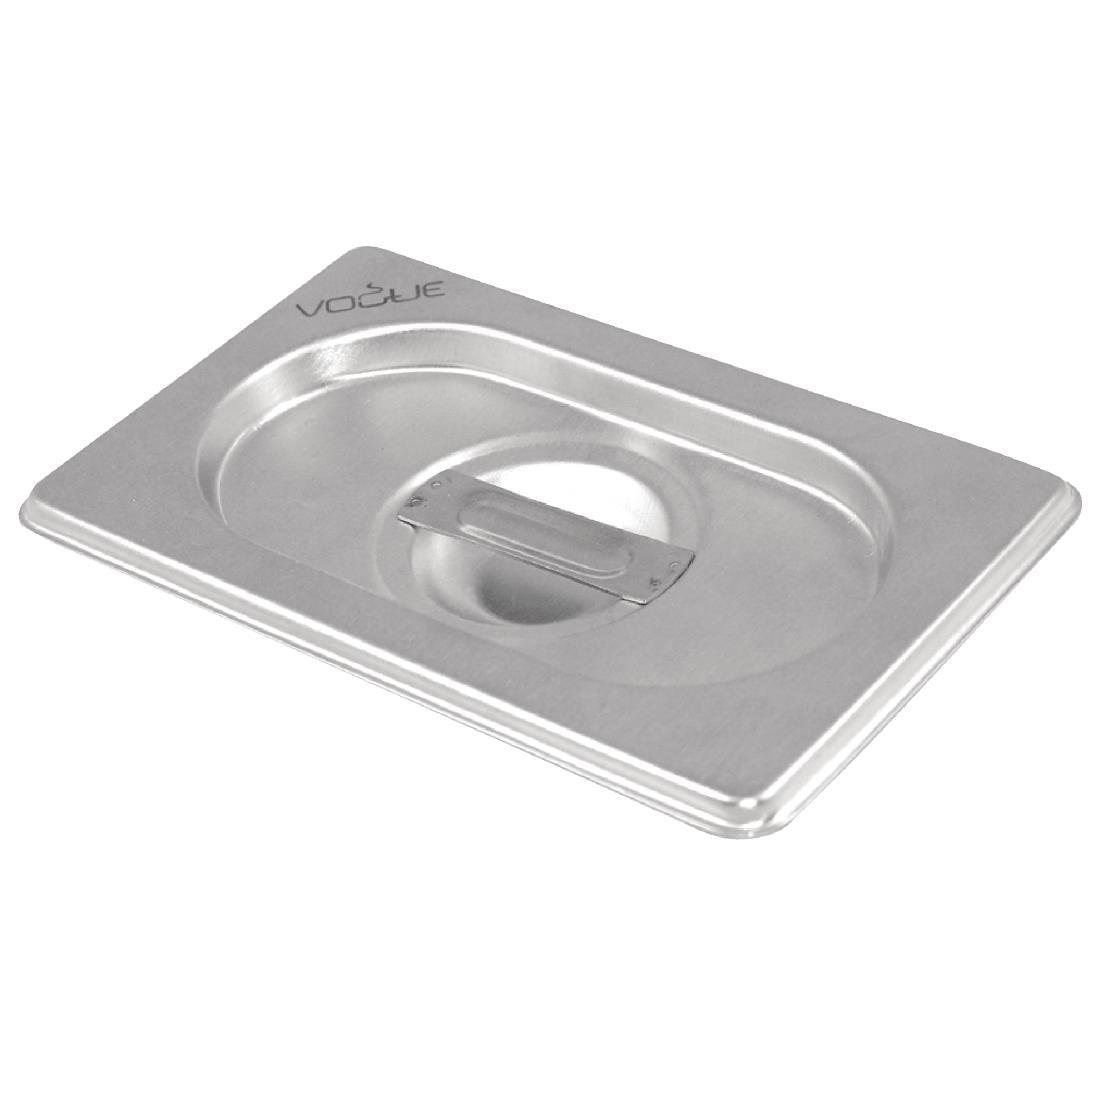 Vogue Stainless Steel 2/3 Gastronorm Tray Lid - HospoStore